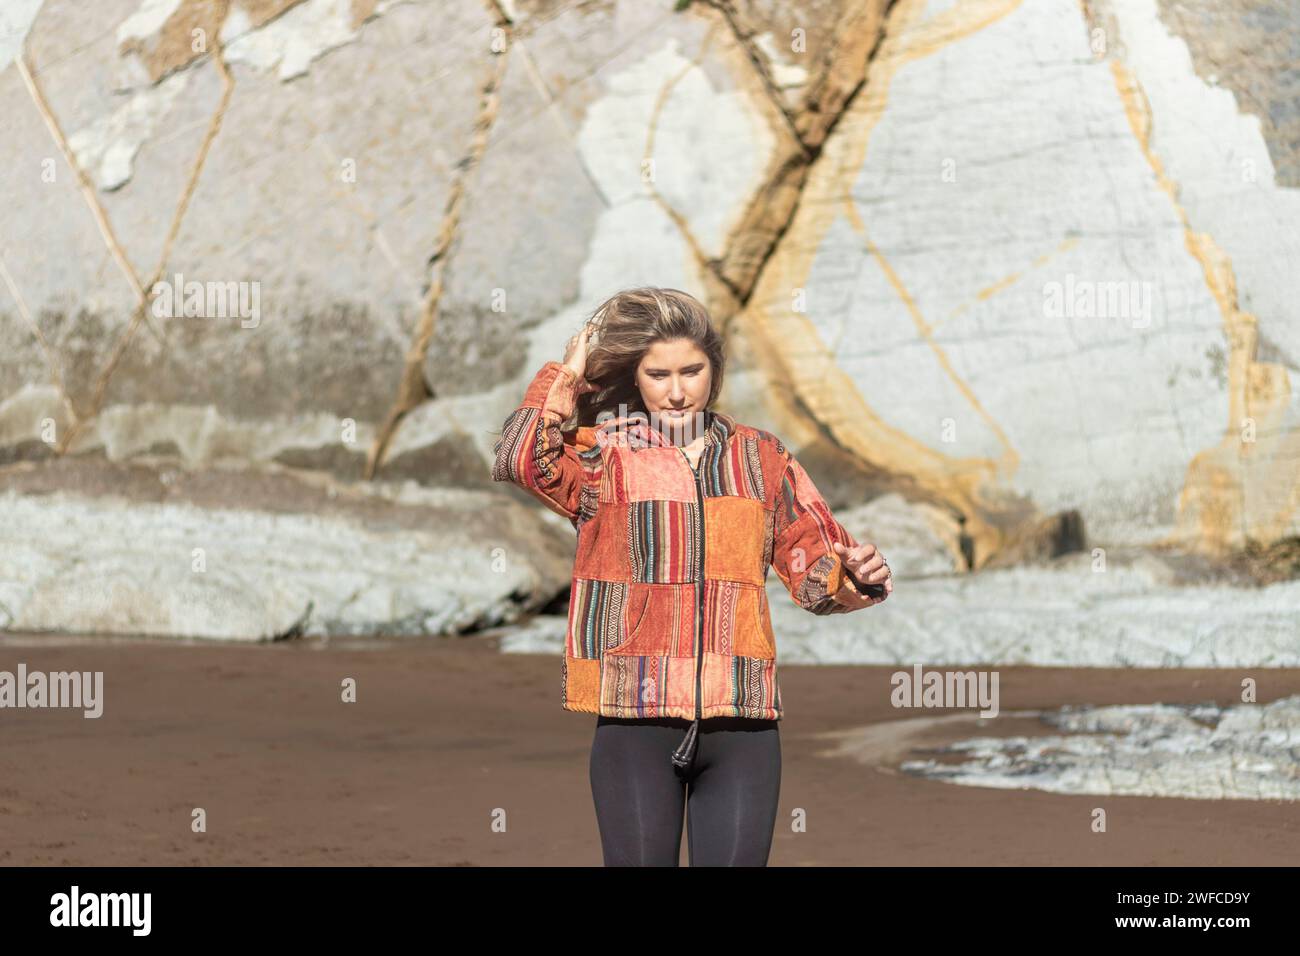 woman in colorful attire stands before a large, patterned rock formation Stock Photo